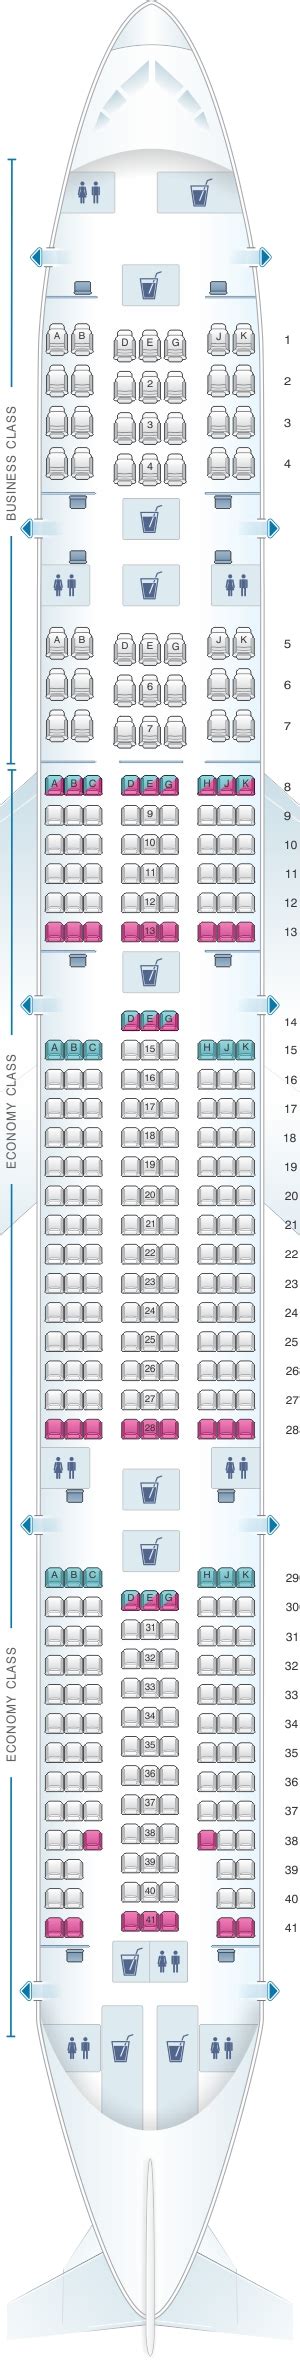 7 Pics Turkish Airlines Seat Selection And View Alqu Blog